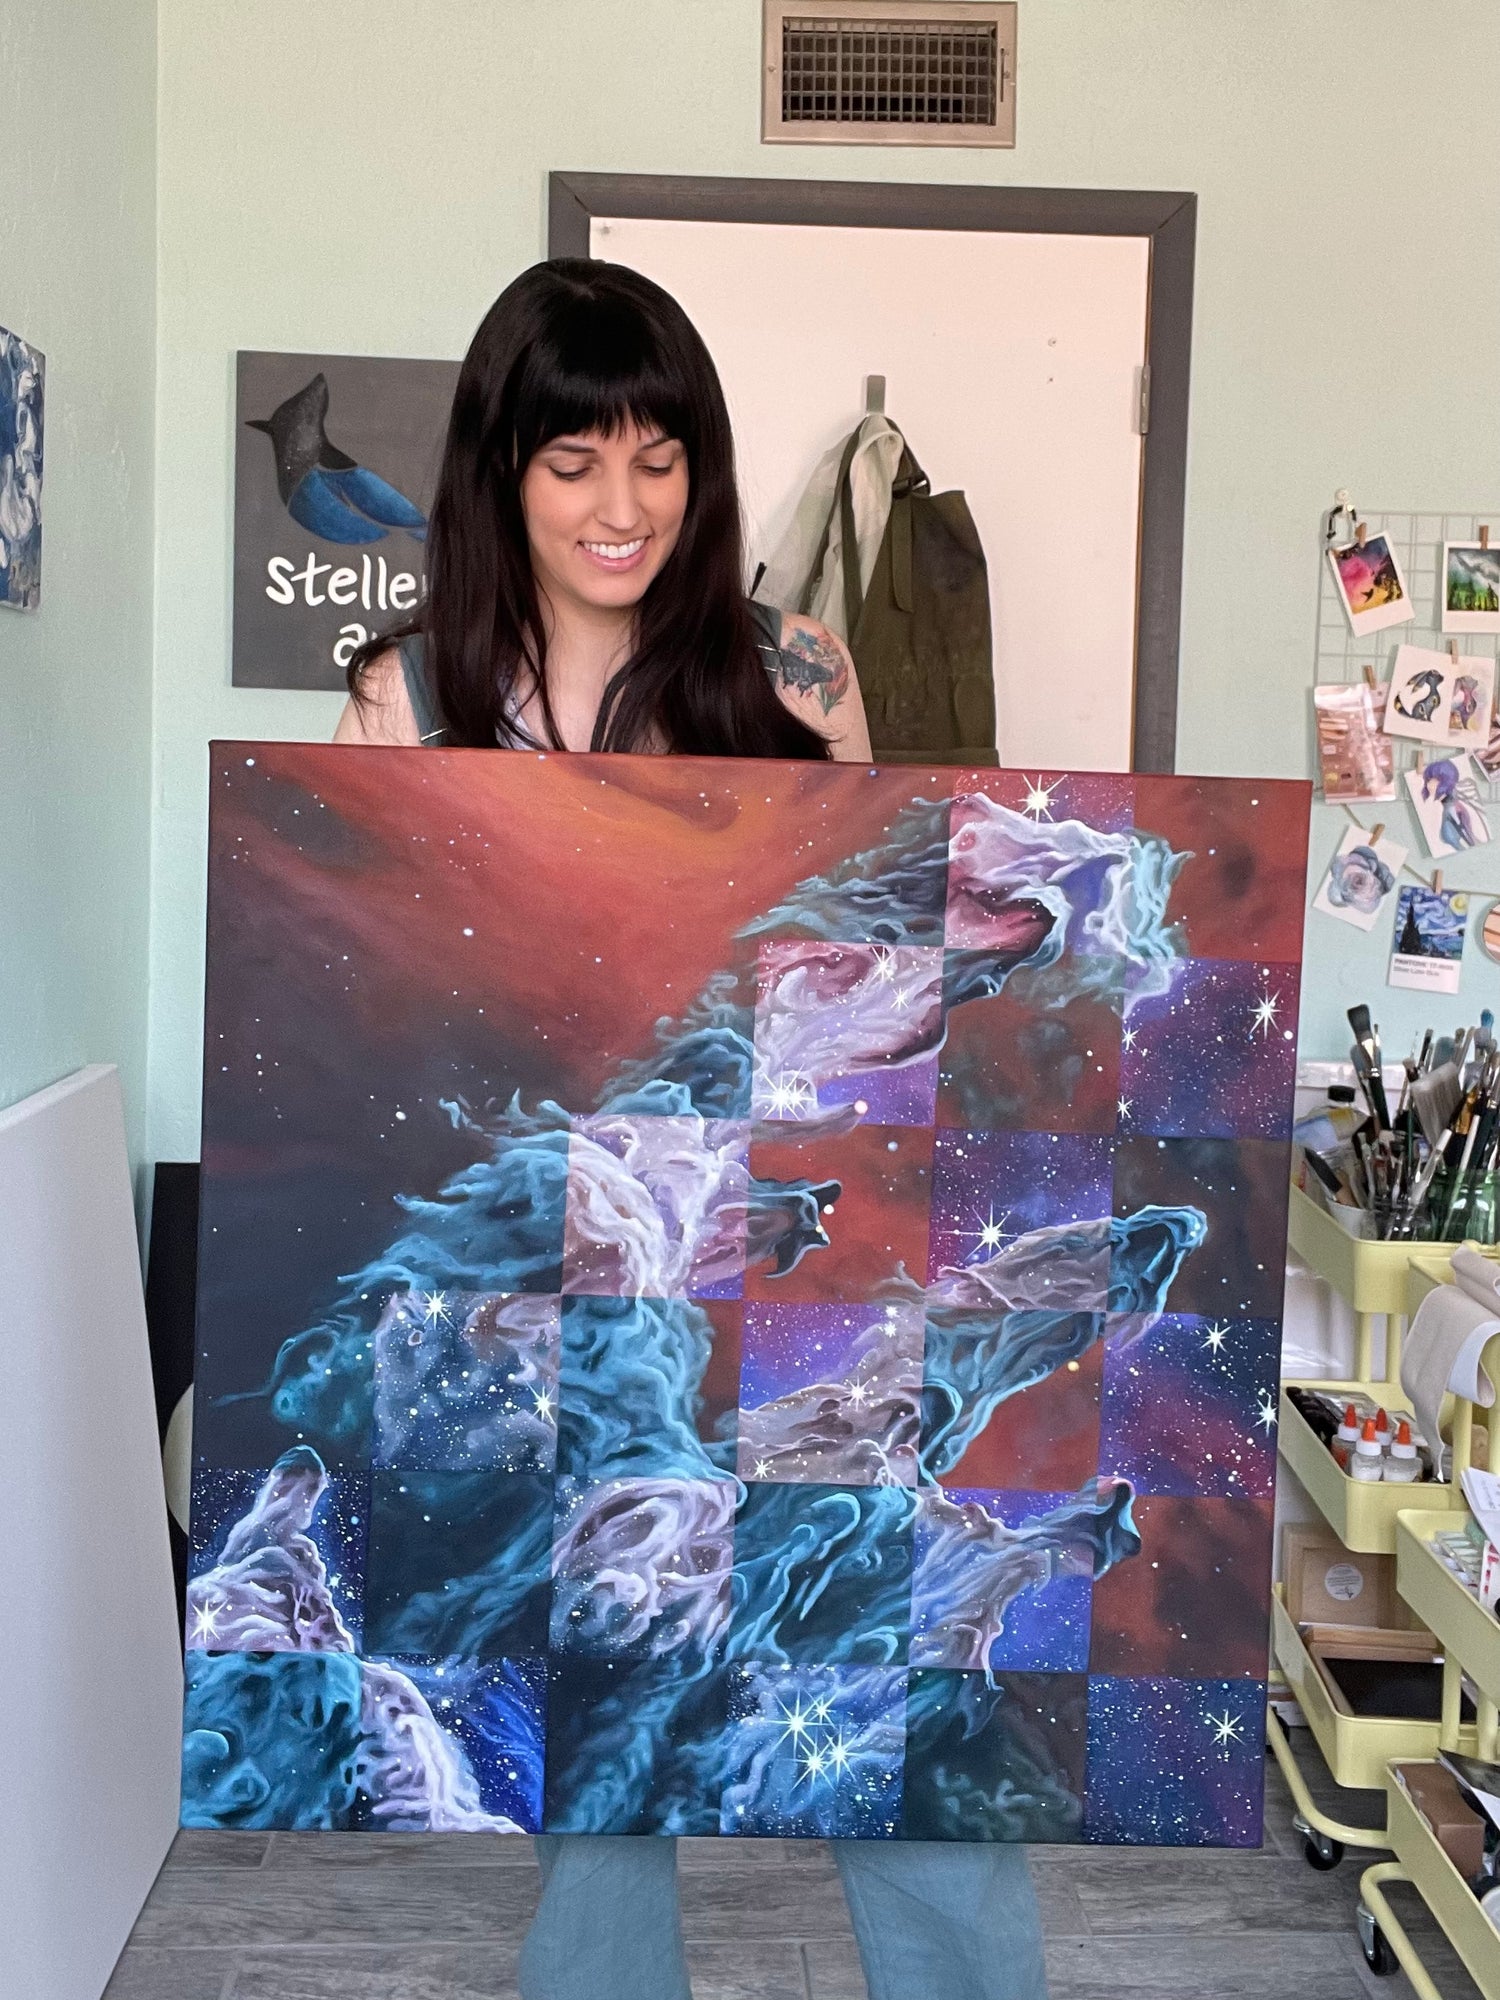 Laci holding a square oil painting of the Pillars of Creation. The painting has a partial checkerboard pattern. The orange squares and blue-grey nebula are how the Pillars look in mid-infrared wavelengths of light. The vibrant purple squares add in shorter, near-infrared wavelengths of light and thousands of stars.